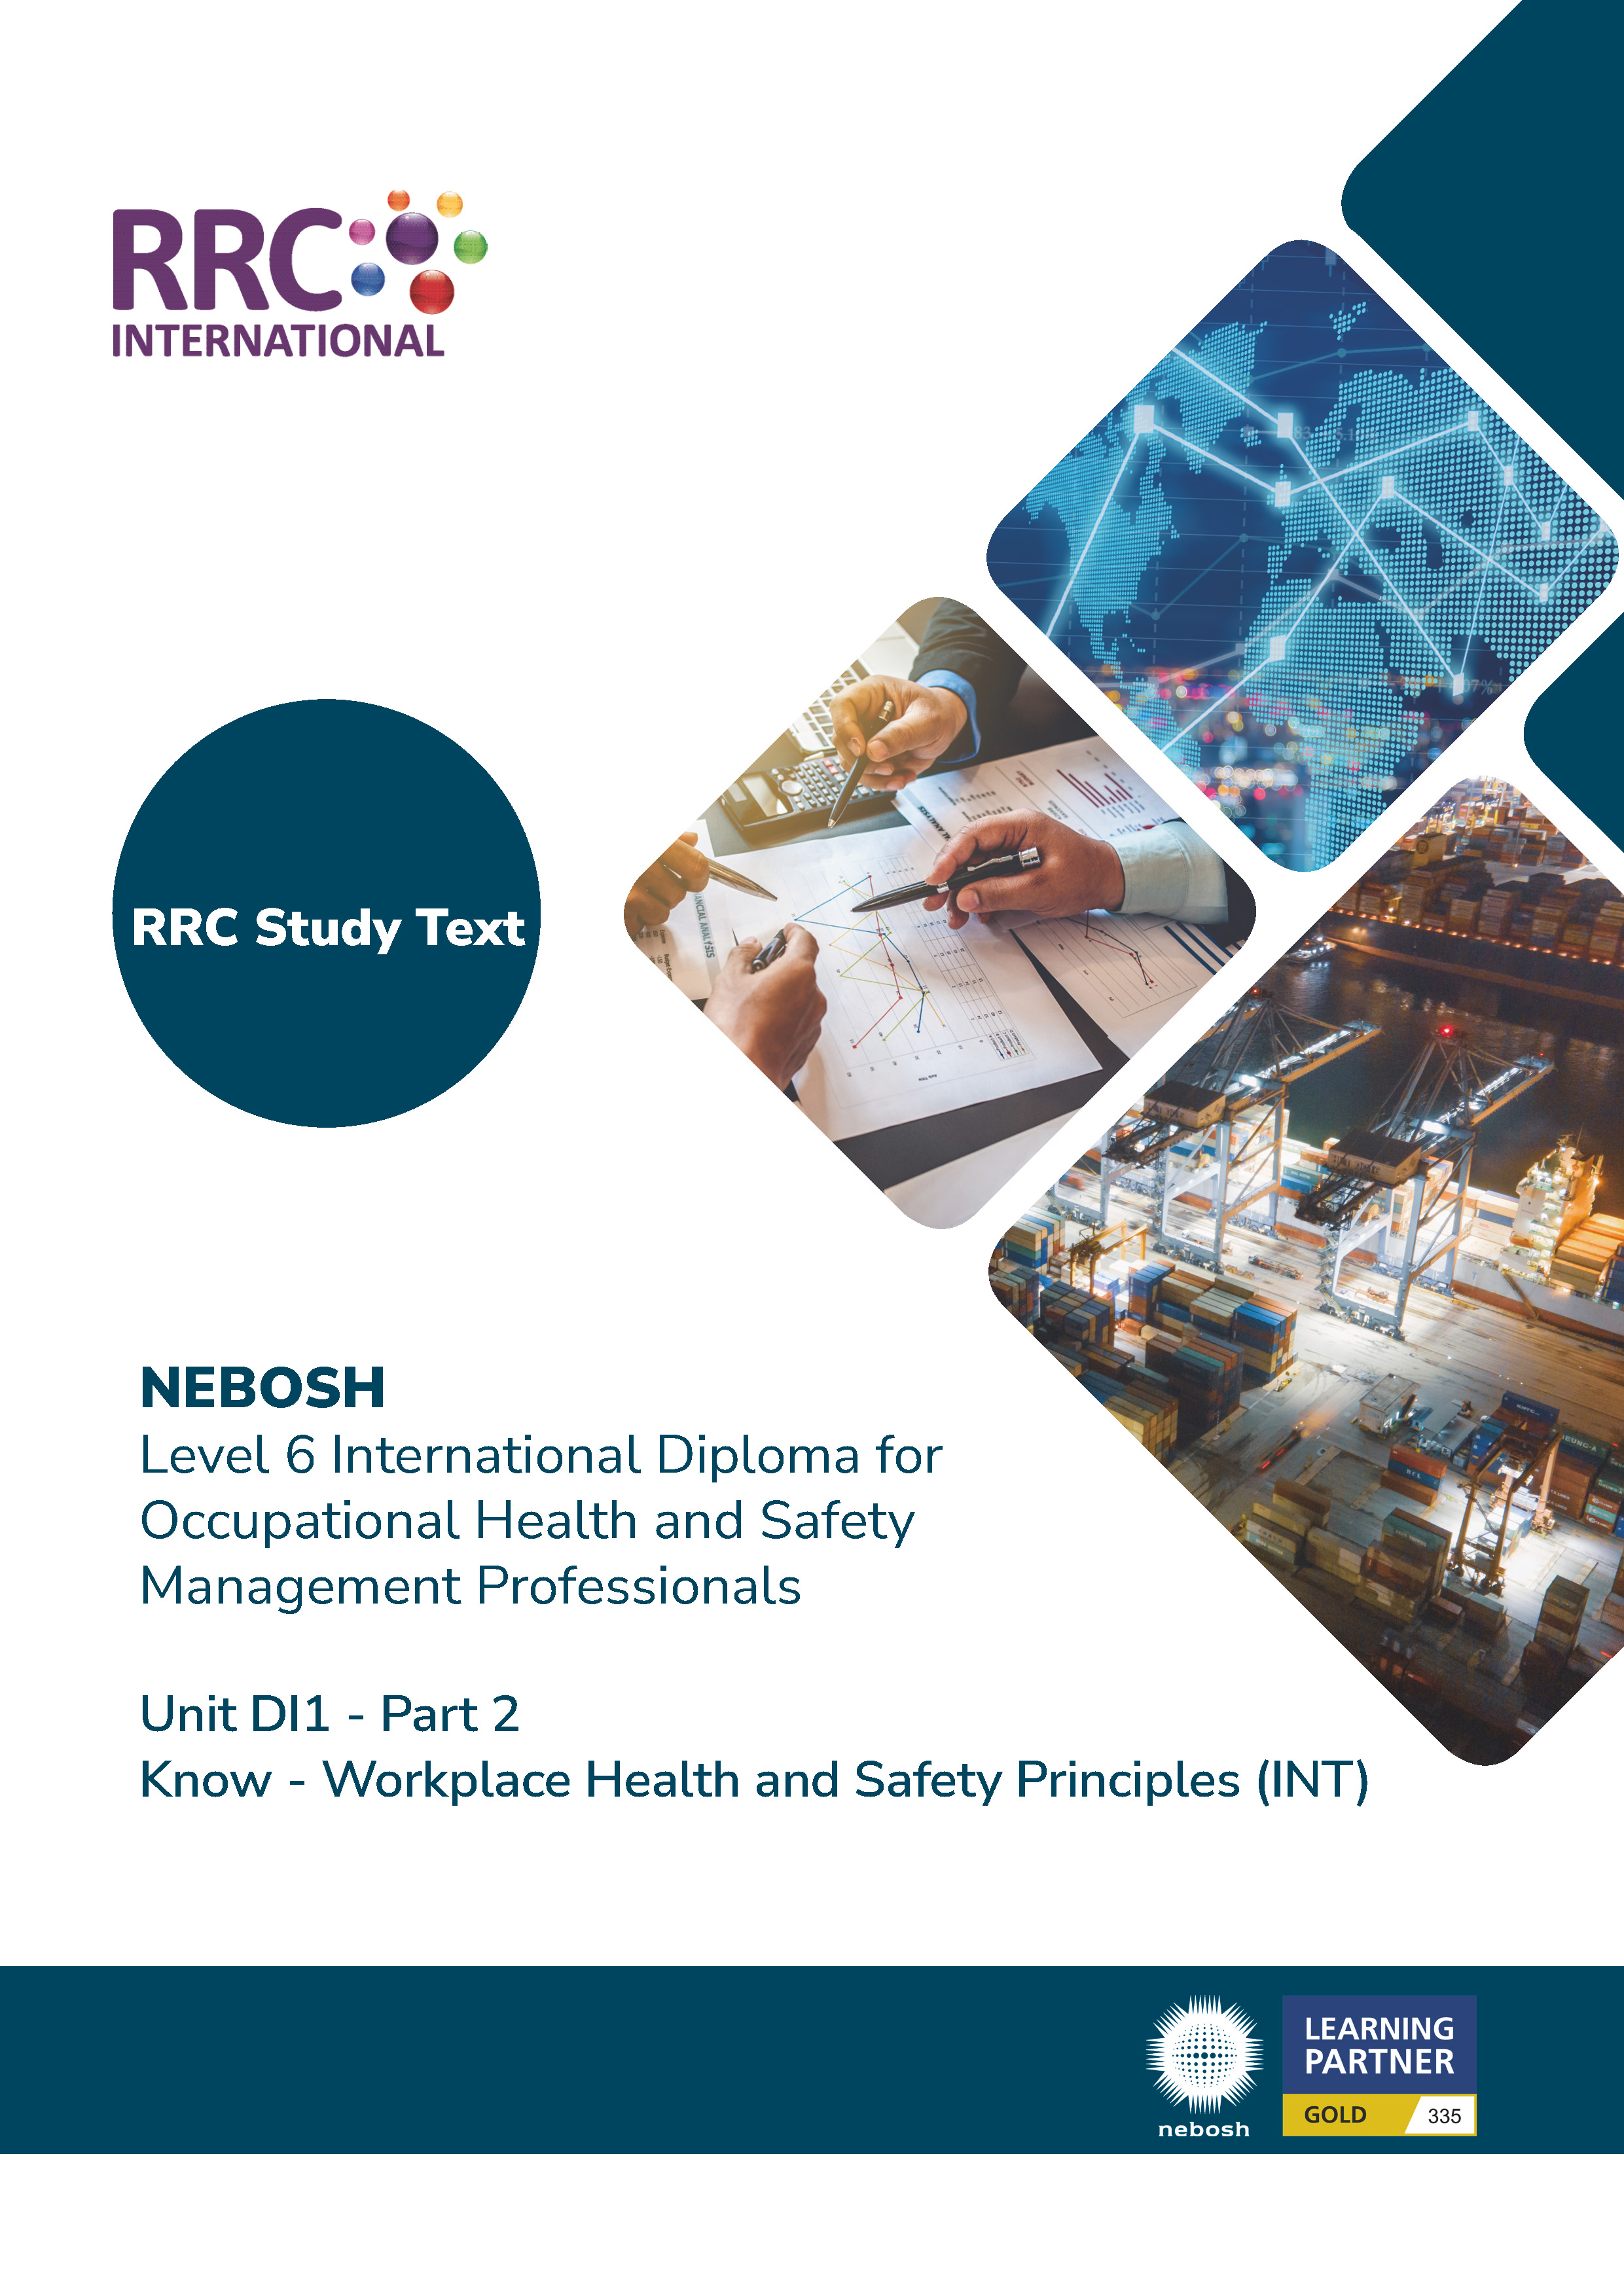 A Guide to the NEBOSH International Diploma for Occupational Health and Safety Management Professionals – Unit DI1: Know - Workplace Health and Safety Principles (International) Book Image